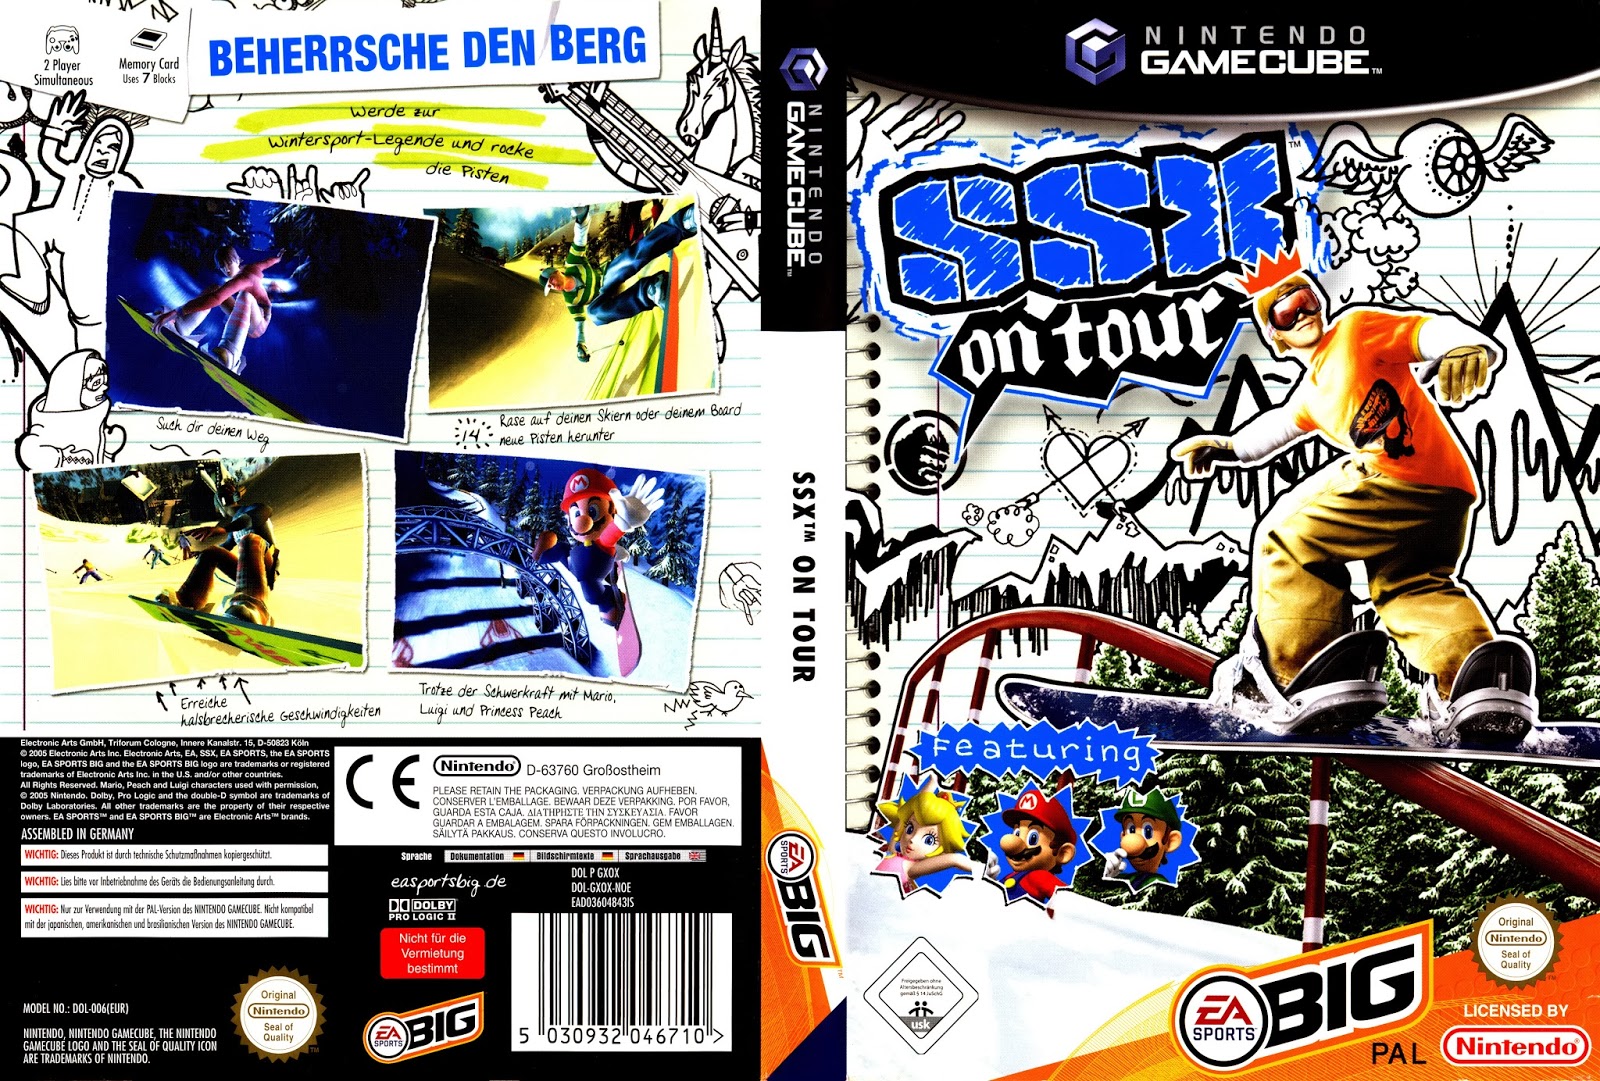 ssx download pc